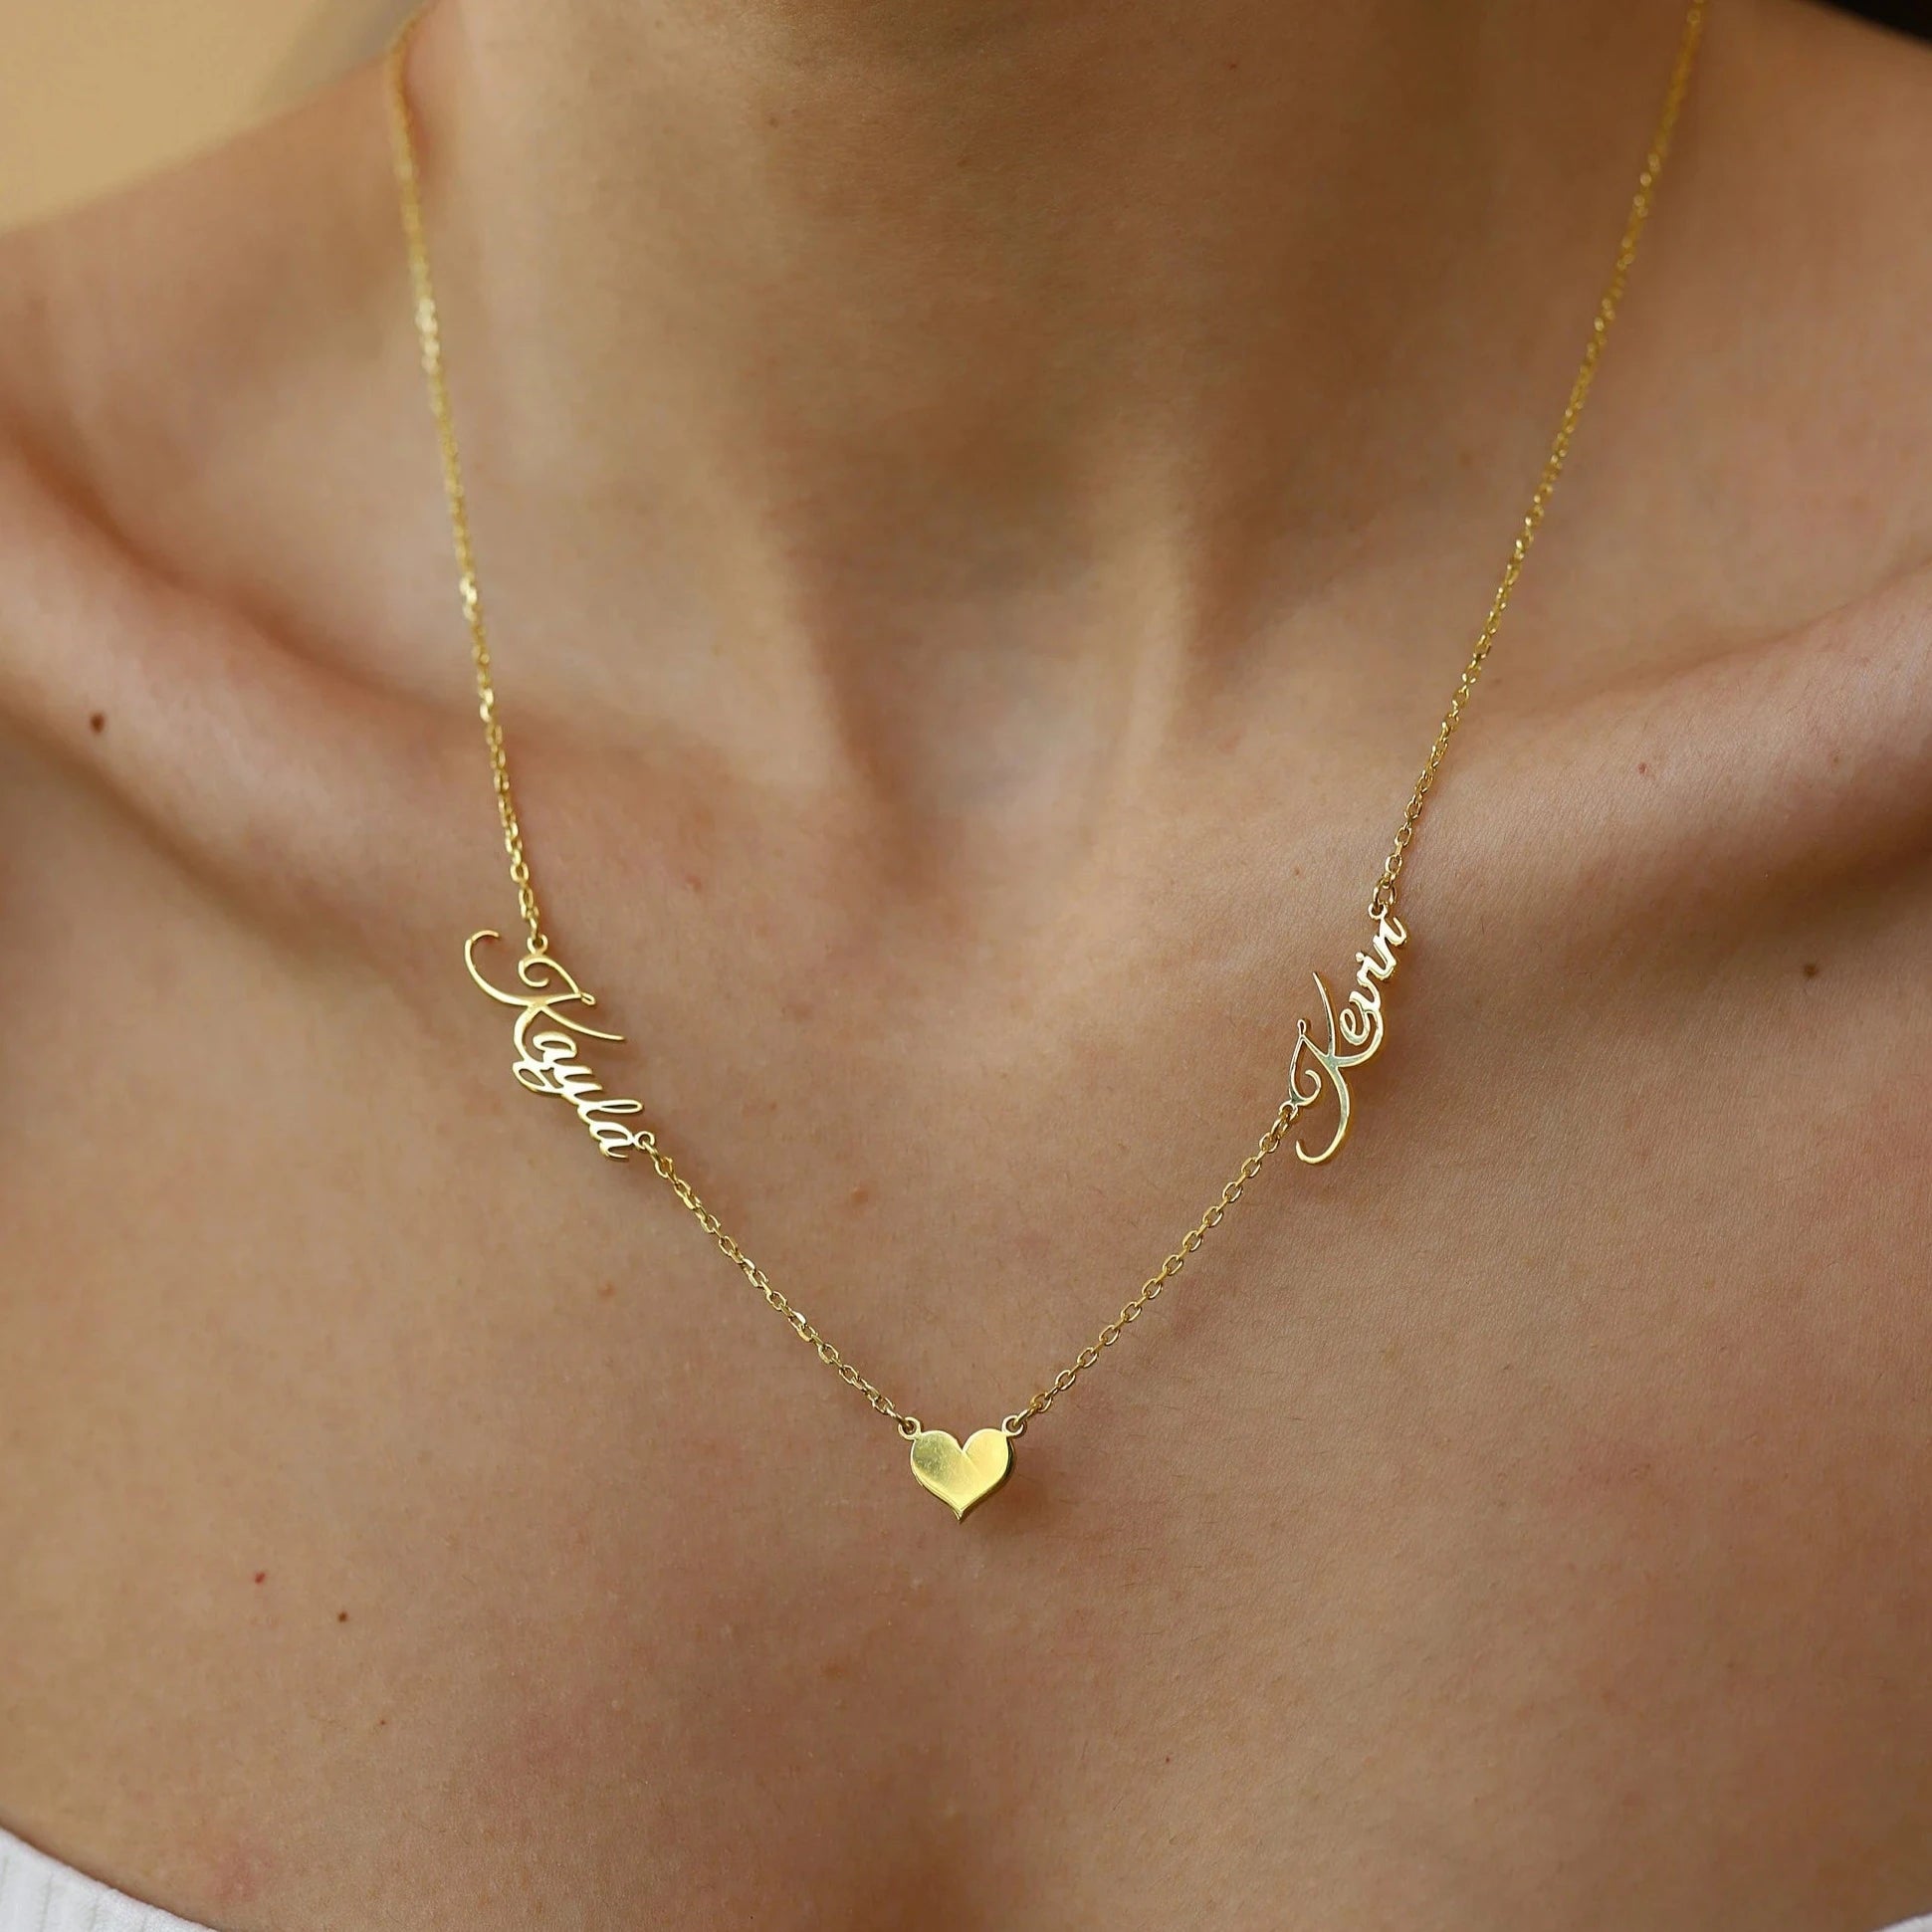 Gold Heart Necklace for Couples - Stylish and Timeless Design